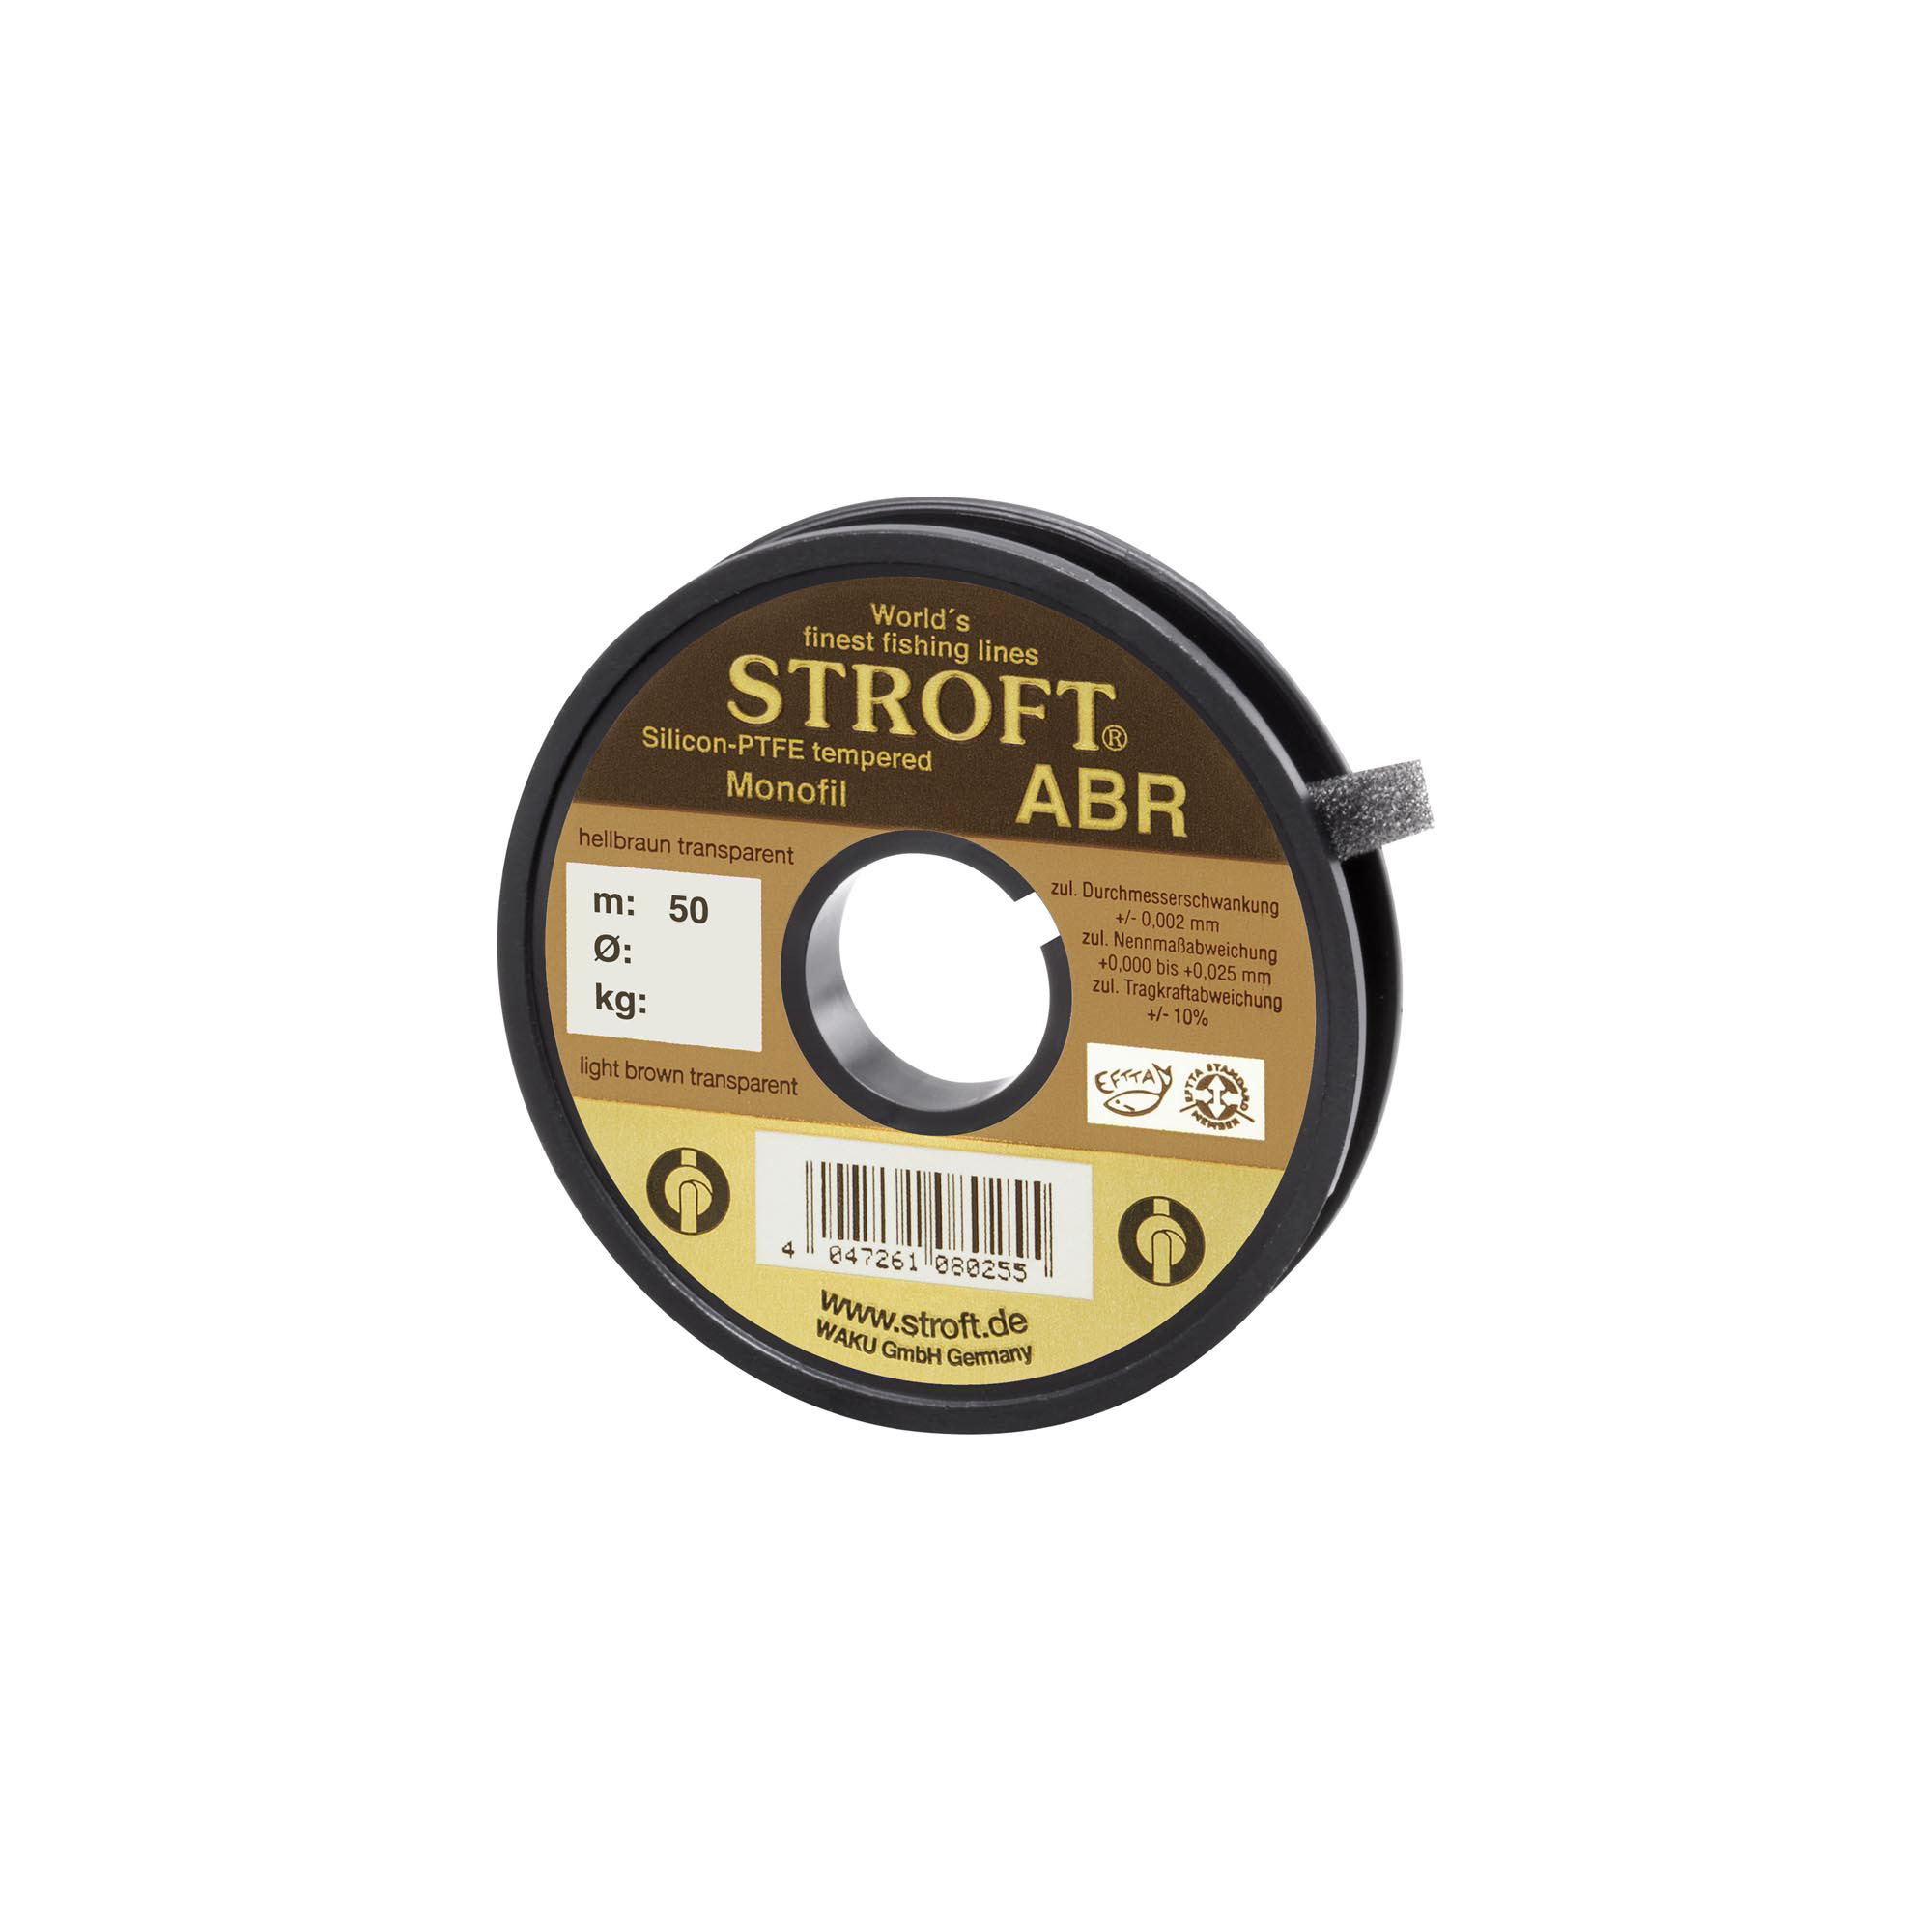 Stroft ABR Tippet | 50 Meter Spools | High-Strength & Controlled-Stretch | Different Variations Available